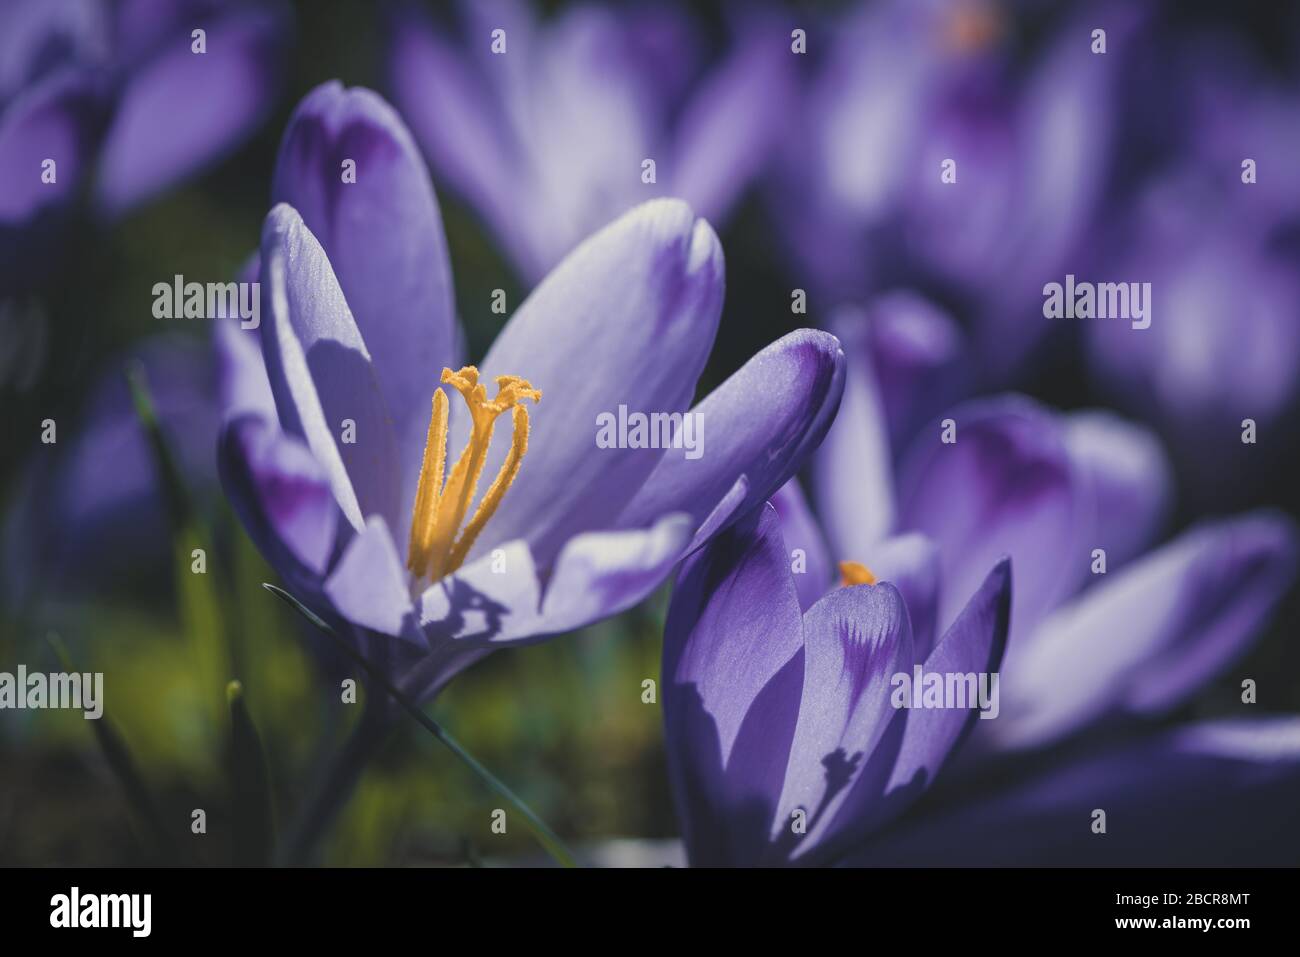 Crocus vernus flowers bloomed at the winter's end. Iridaceae family. Floral background. Spring symbol. Stock Photo